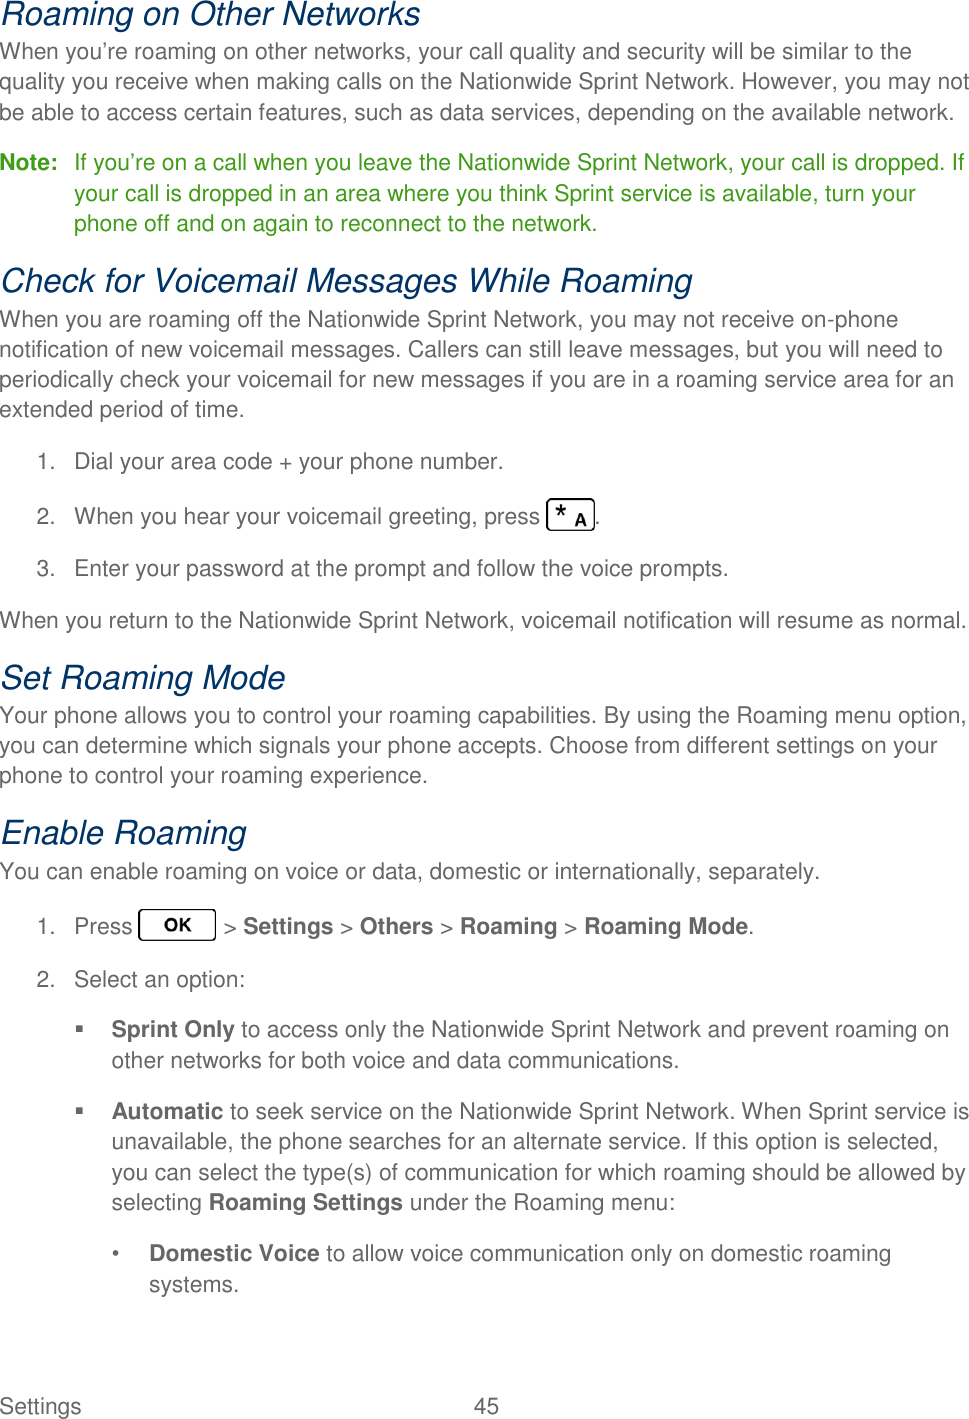 Settings  45   Roaming on Other Networks When you’re roaming on other networks, your call quality and security will be similar to the quality you receive when making calls on the Nationwide Sprint Network. However, you may not be able to access certain features, such as data services, depending on the available network. Note:  If you’re on a call when you leave the Nationwide Sprint Network, your call is dropped. If your call is dropped in an area where you think Sprint service is available, turn your phone off and on again to reconnect to the network. Check for Voicemail Messages While Roaming When you are roaming off the Nationwide Sprint Network, you may not receive on-phone notification of new voicemail messages. Callers can still leave messages, but you will need to periodically check your voicemail for new messages if you are in a roaming service area for an extended period of time. 1.  Dial your area code + your phone number. 2.  When you hear your voicemail greeting, press  . 3.  Enter your password at the prompt and follow the voice prompts. When you return to the Nationwide Sprint Network, voicemail notification will resume as normal. Set Roaming Mode Your phone allows you to control your roaming capabilities. By using the Roaming menu option, you can determine which signals your phone accepts. Choose from different settings on your phone to control your roaming experience. Enable Roaming You can enable roaming on voice or data, domestic or internationally, separately. 1.  Press   &gt; Settings &gt; Others &gt; Roaming &gt; Roaming Mode. 2.  Select an option:  Sprint Only to access only the Nationwide Sprint Network and prevent roaming on other networks for both voice and data communications.  Automatic to seek service on the Nationwide Sprint Network. When Sprint service is unavailable, the phone searches for an alternate service. If this option is selected, you can select the type(s) of communication for which roaming should be allowed by selecting Roaming Settings under the Roaming menu: • Domestic Voice to allow voice communication only on domestic roaming systems. 